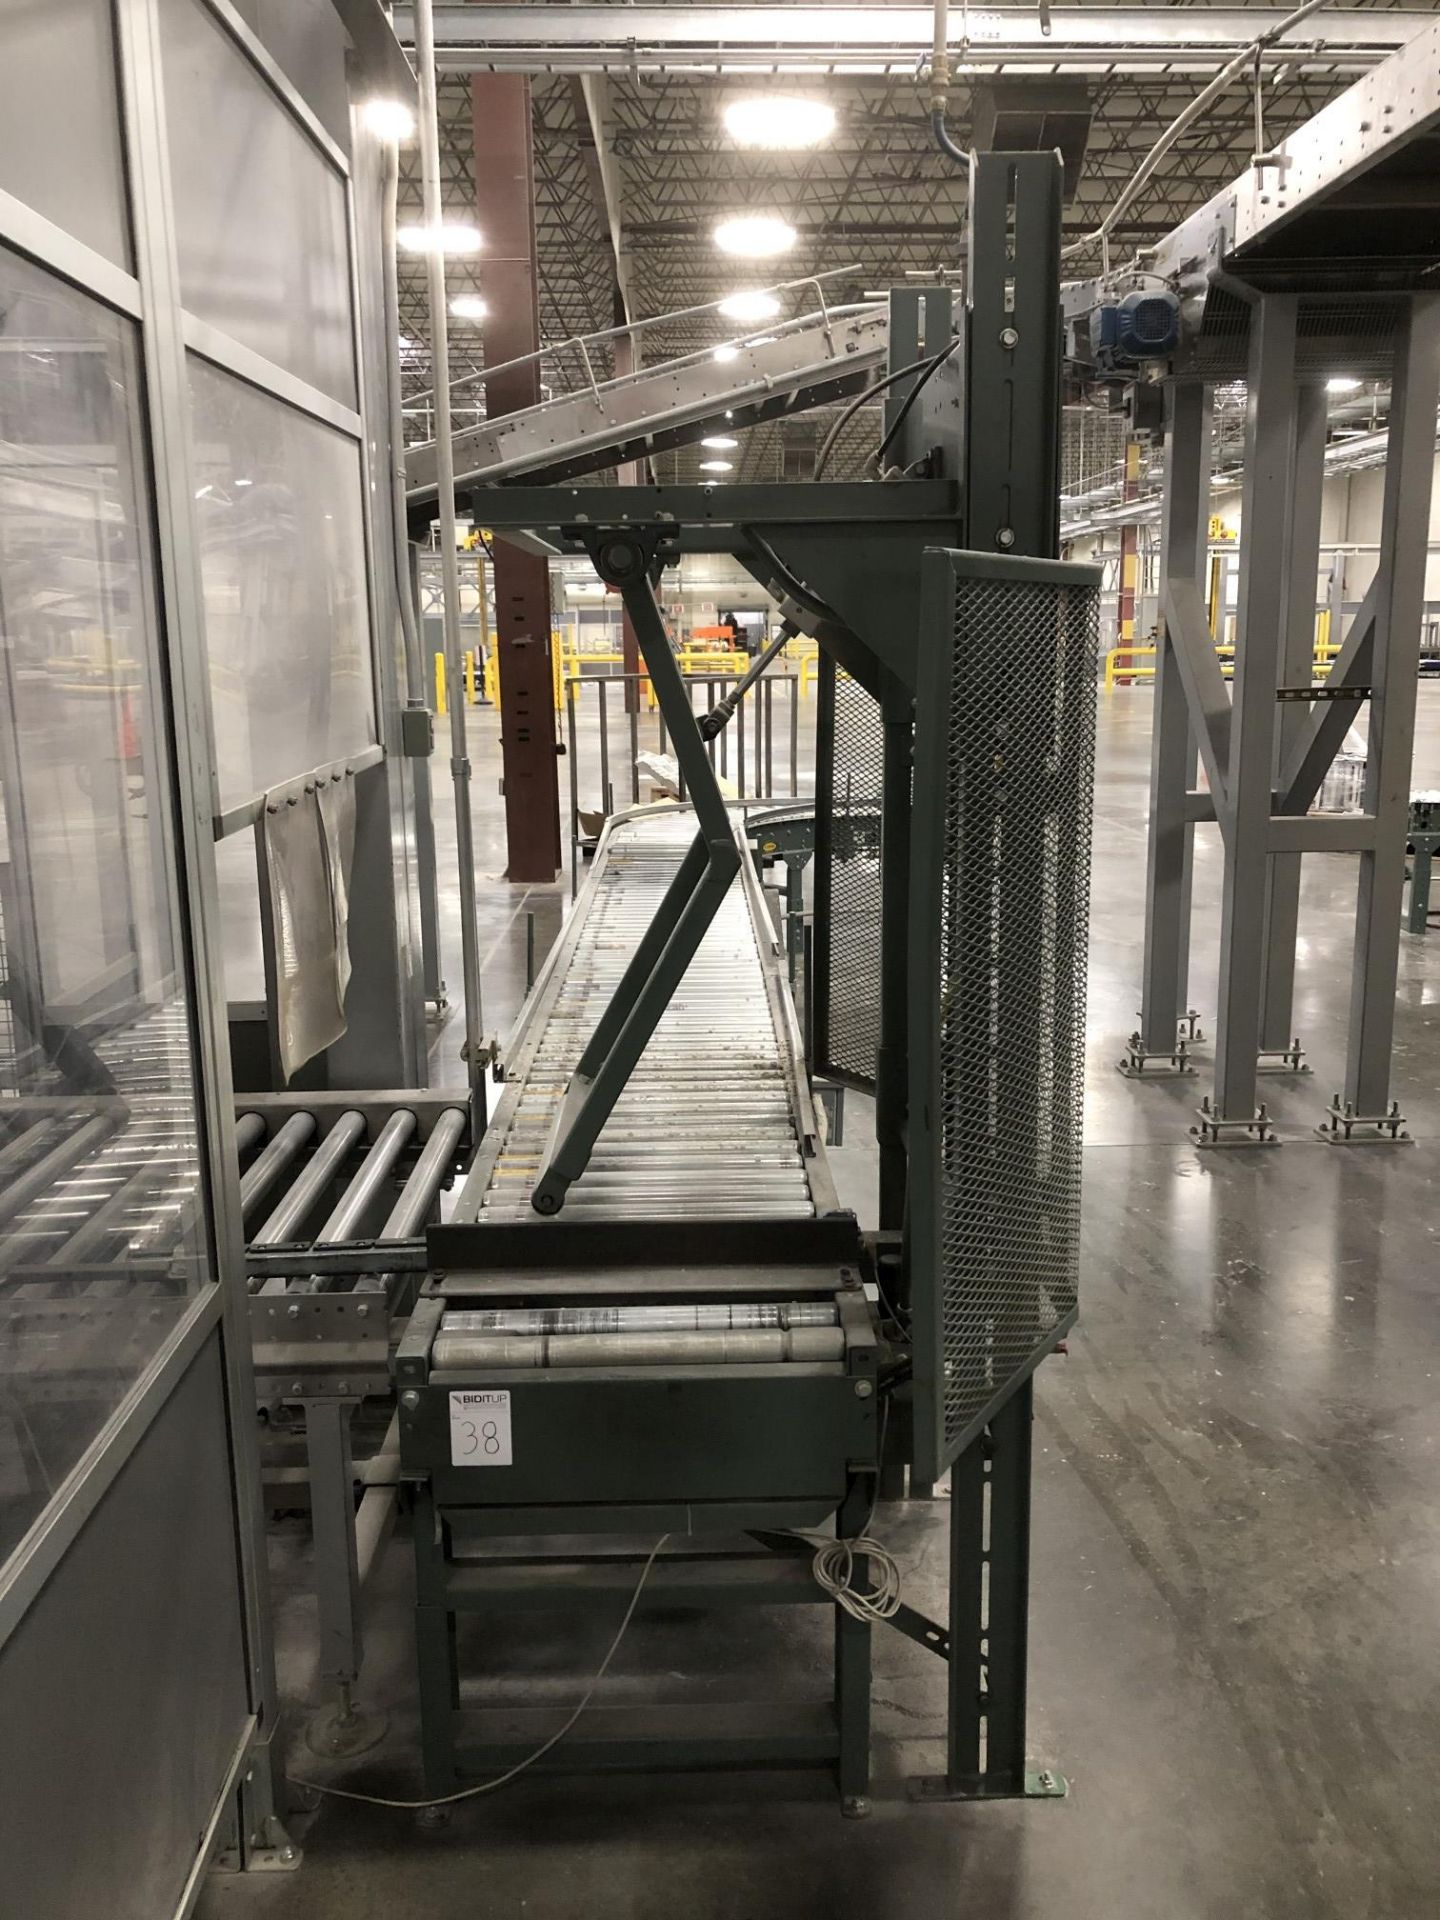 All Hytrol Conveyor Throughout Entire Site, Mostly 20" Wide Powered Roller Conveyor [Please - Image 8 of 80